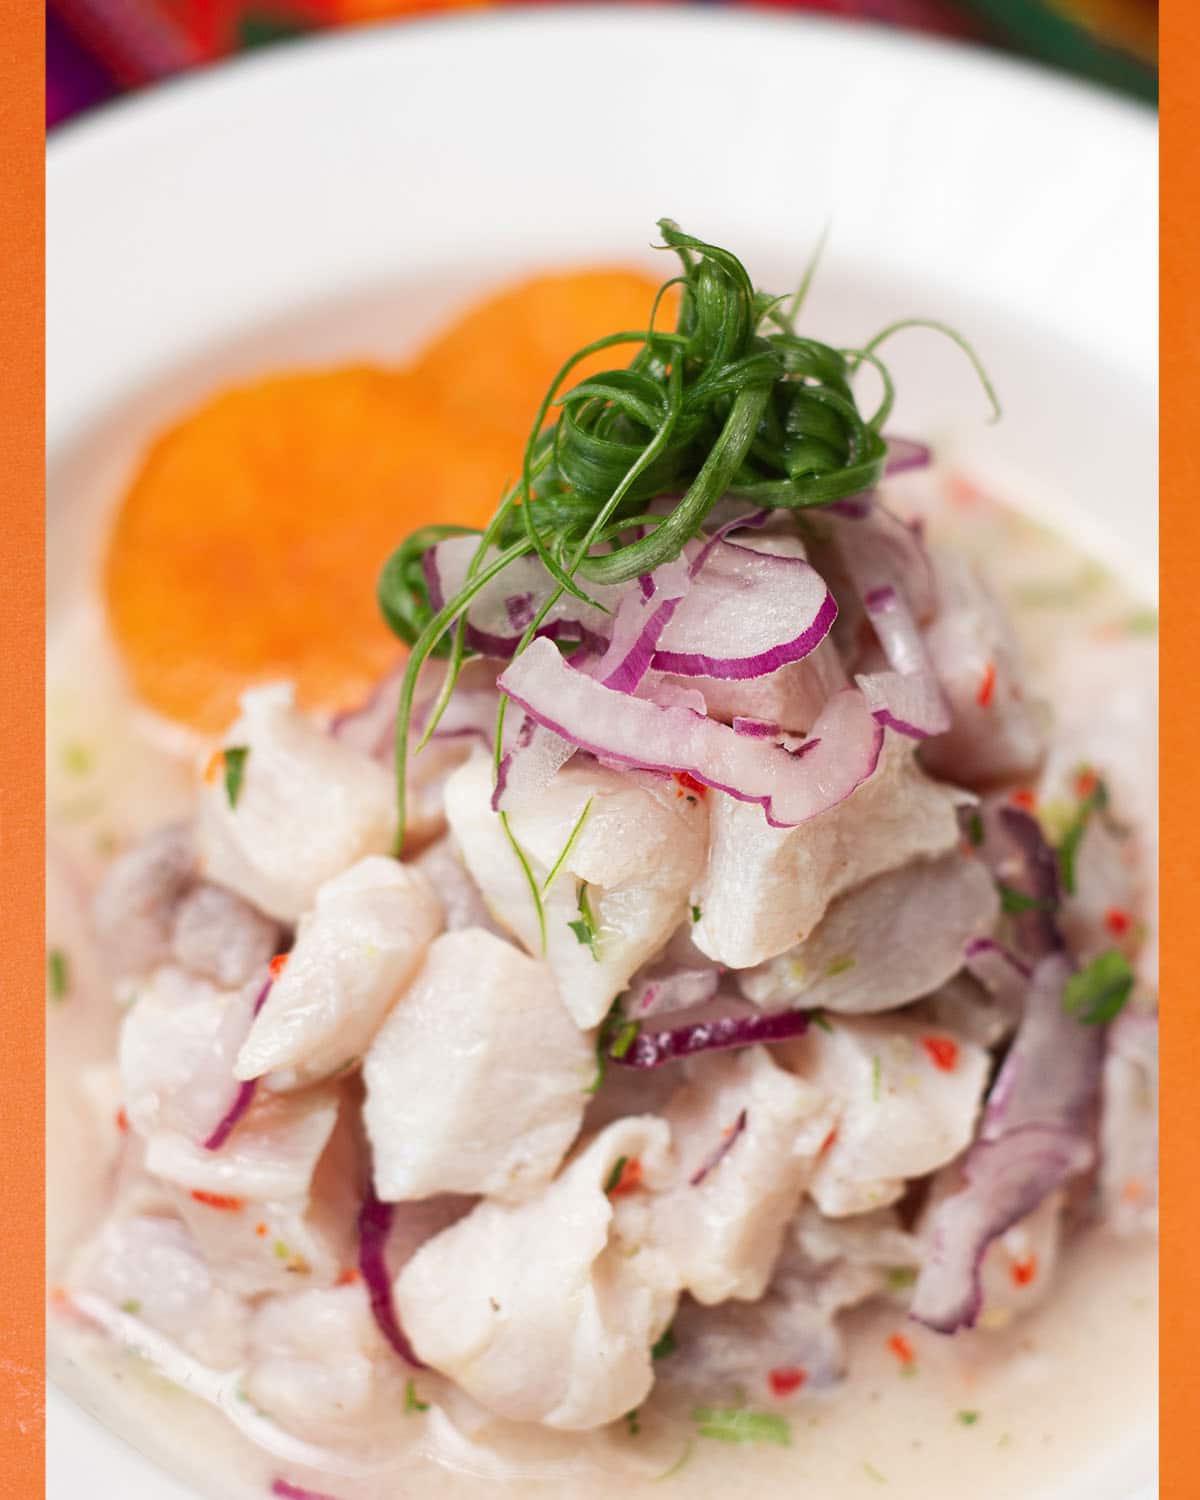 It is probably evident by now that you should consume Ceviche straightaway. Leftover Ceviche is, however, bound to happen. If you find yourself in this scenario, you should drain as much marinade as possible.